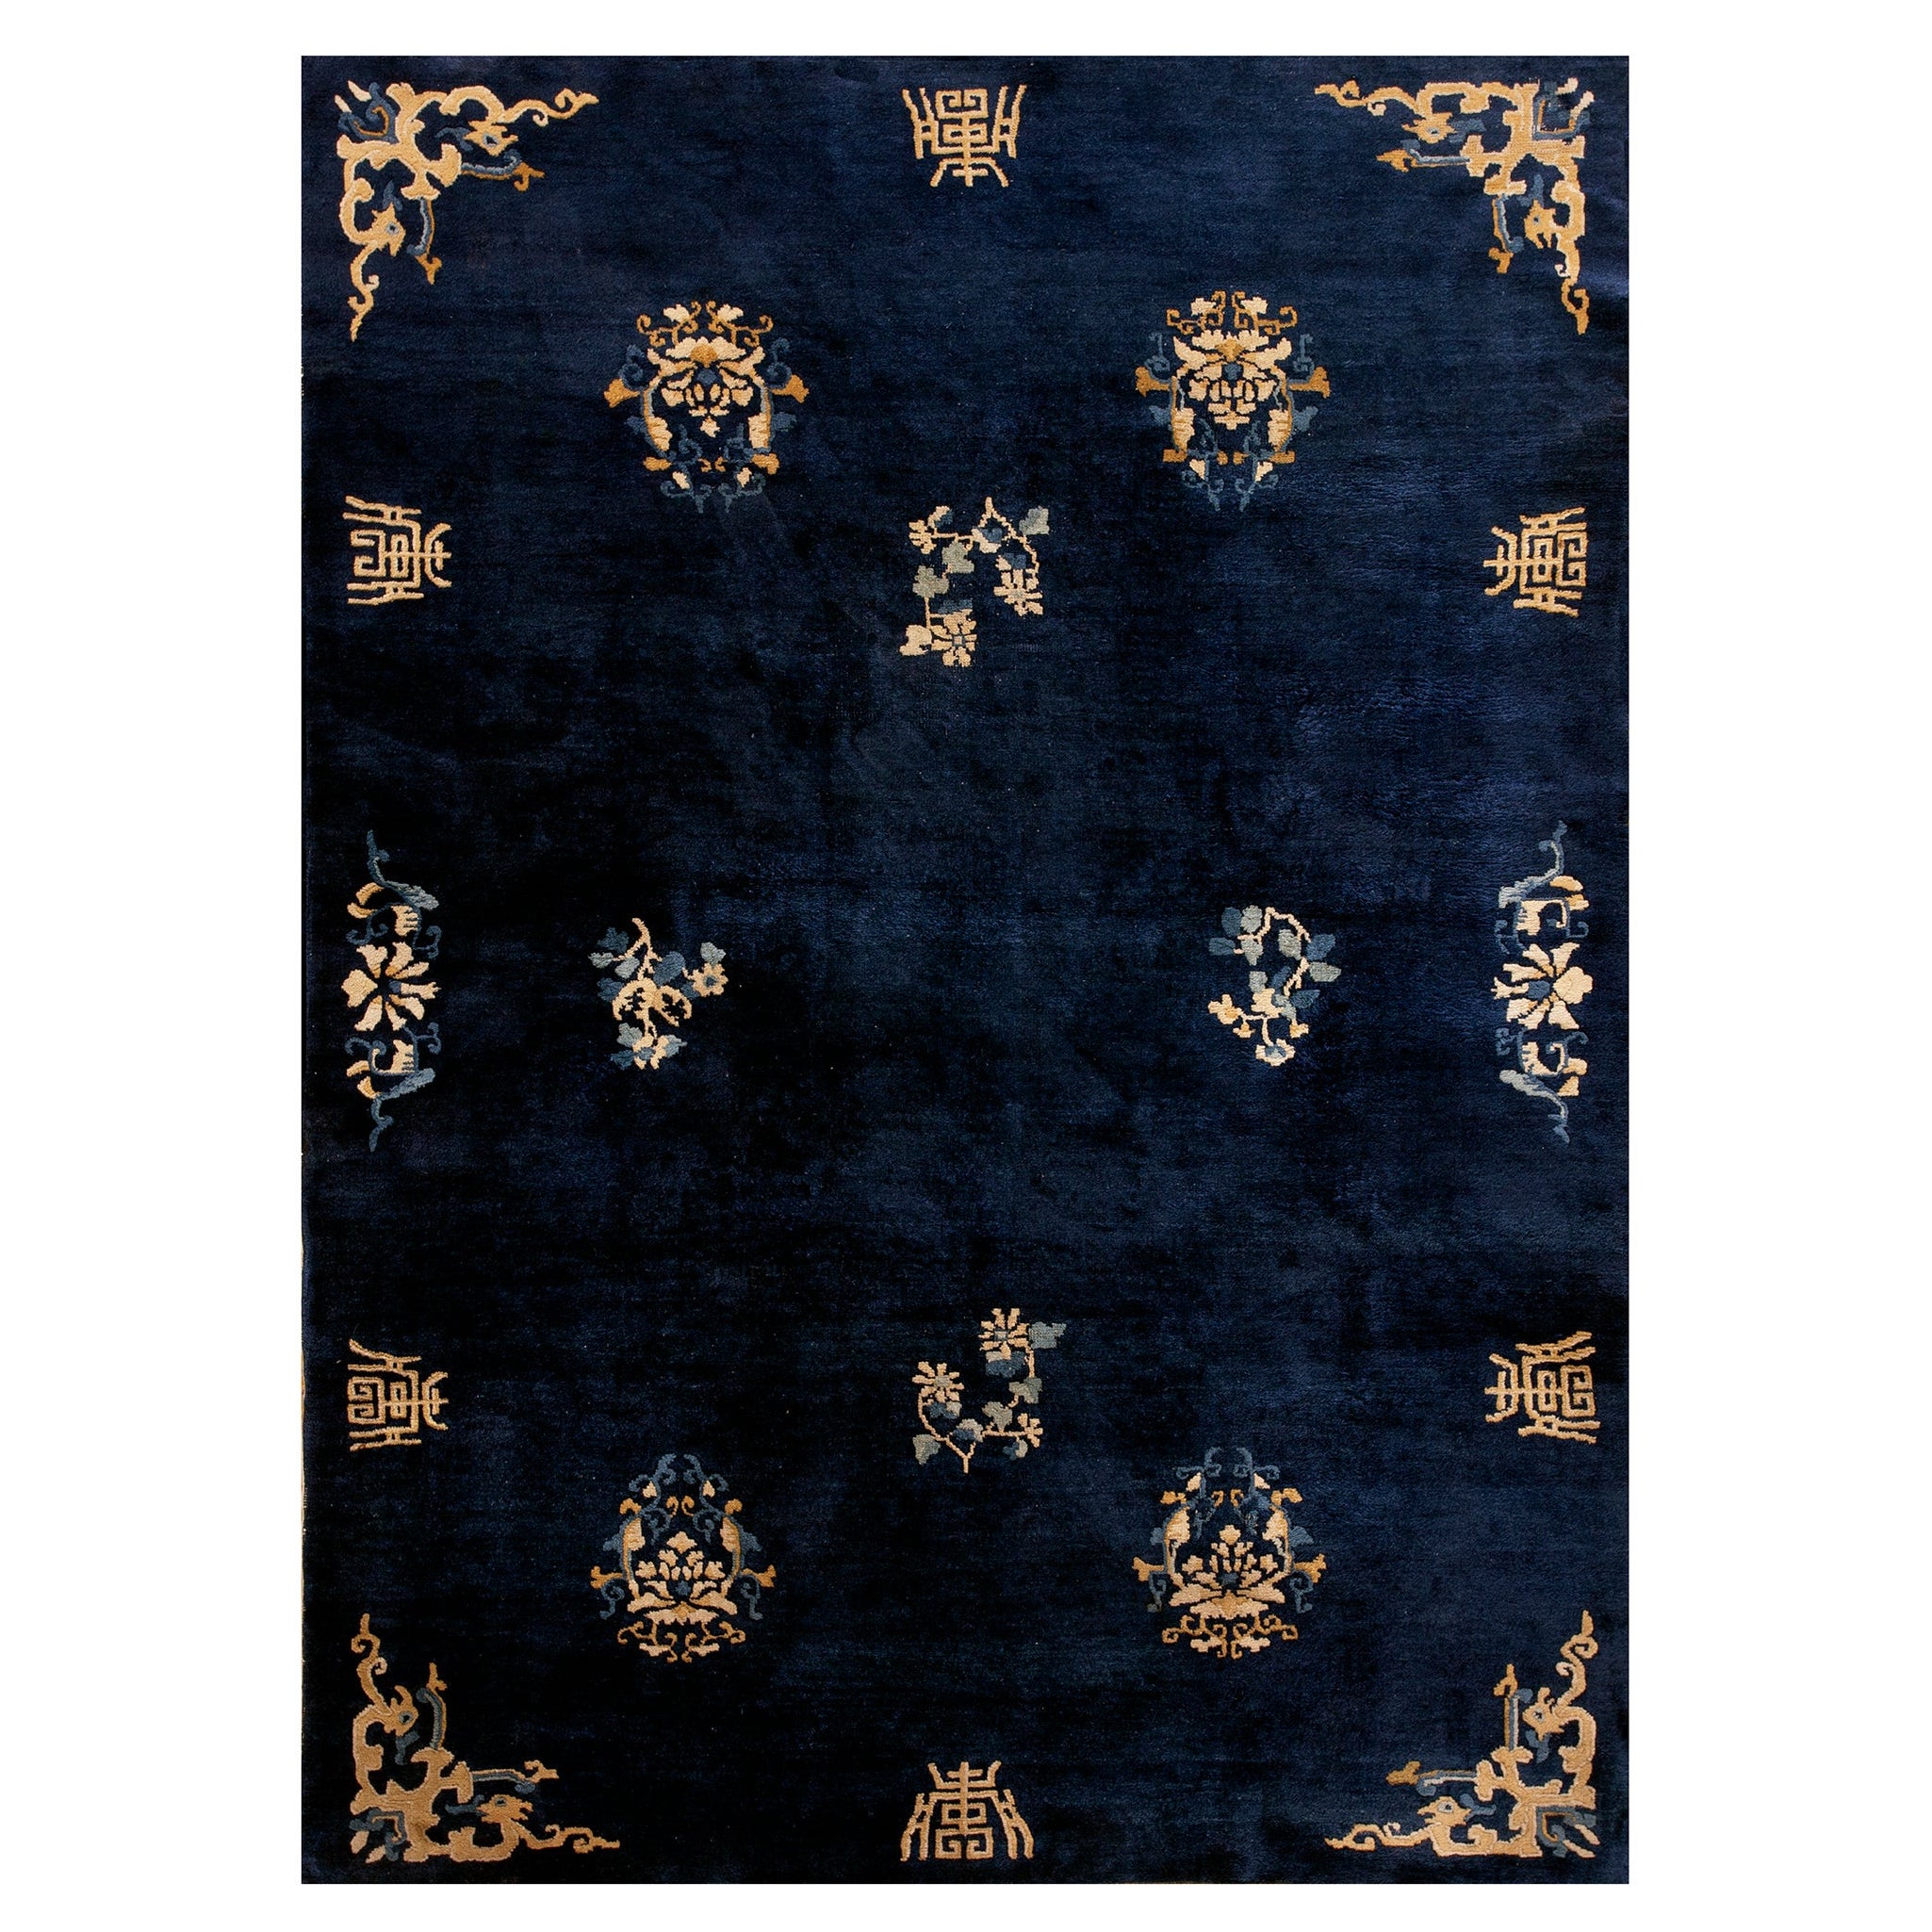 Early 20th Century Chinese Peking Carpet ( 6'3" x 8'6" - 191 x 259 ) For Sale